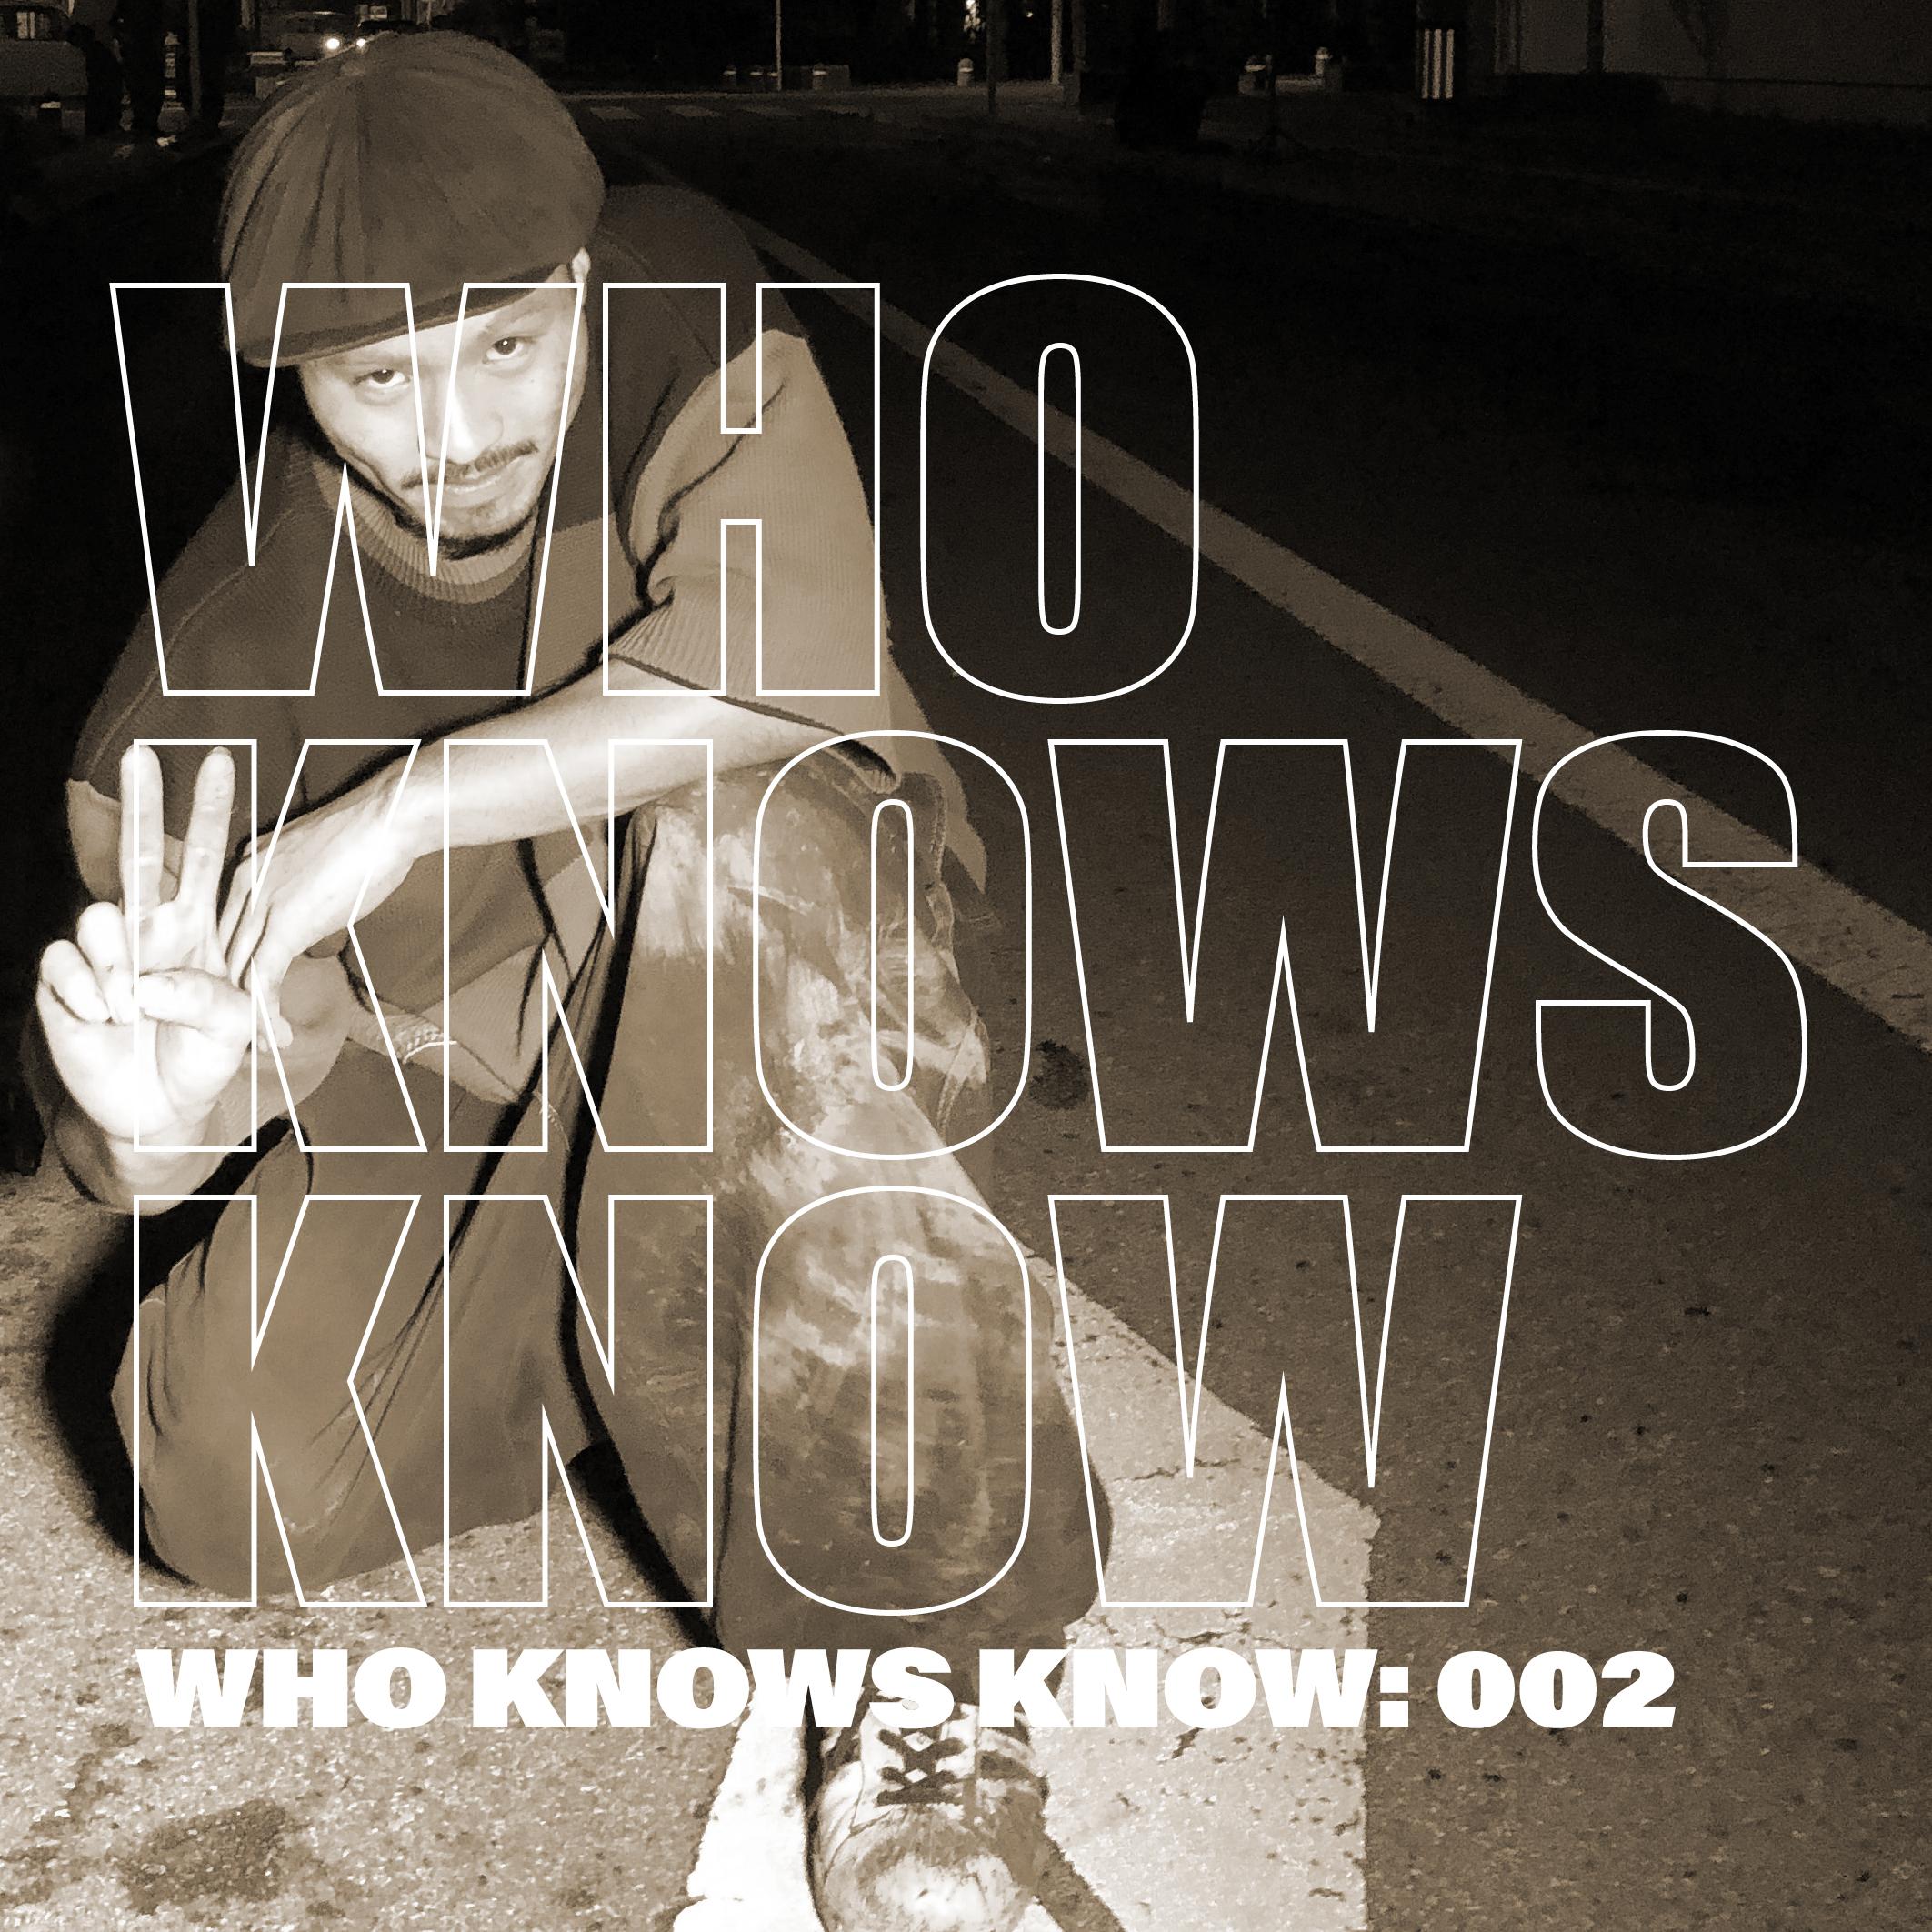 You are currently viewing WHO KNOWS KNOW: 002 KOUGA KINJYO